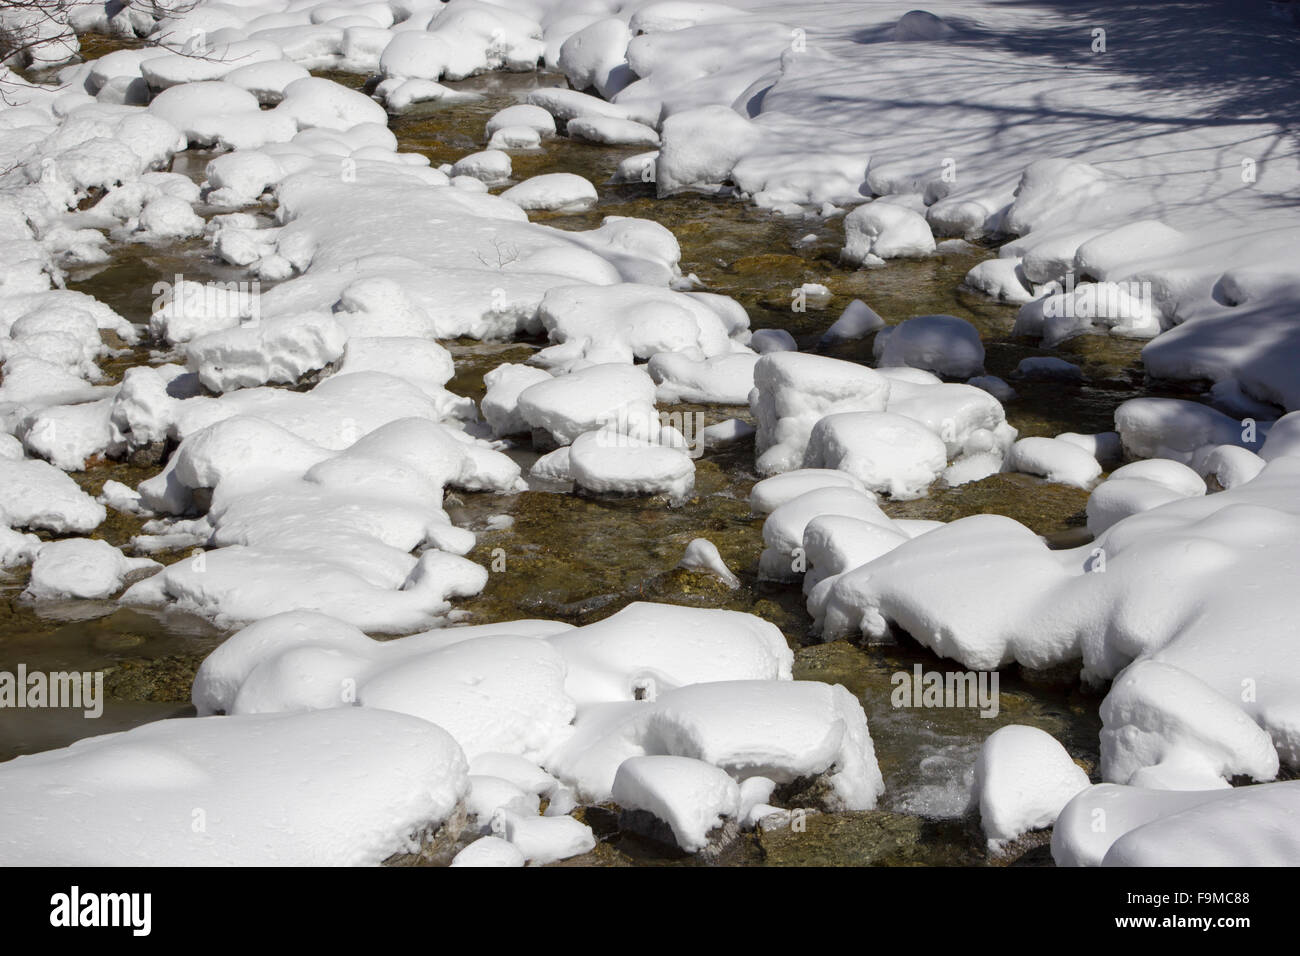 melting snows in spring mountains with crystal clear water Stock Photo